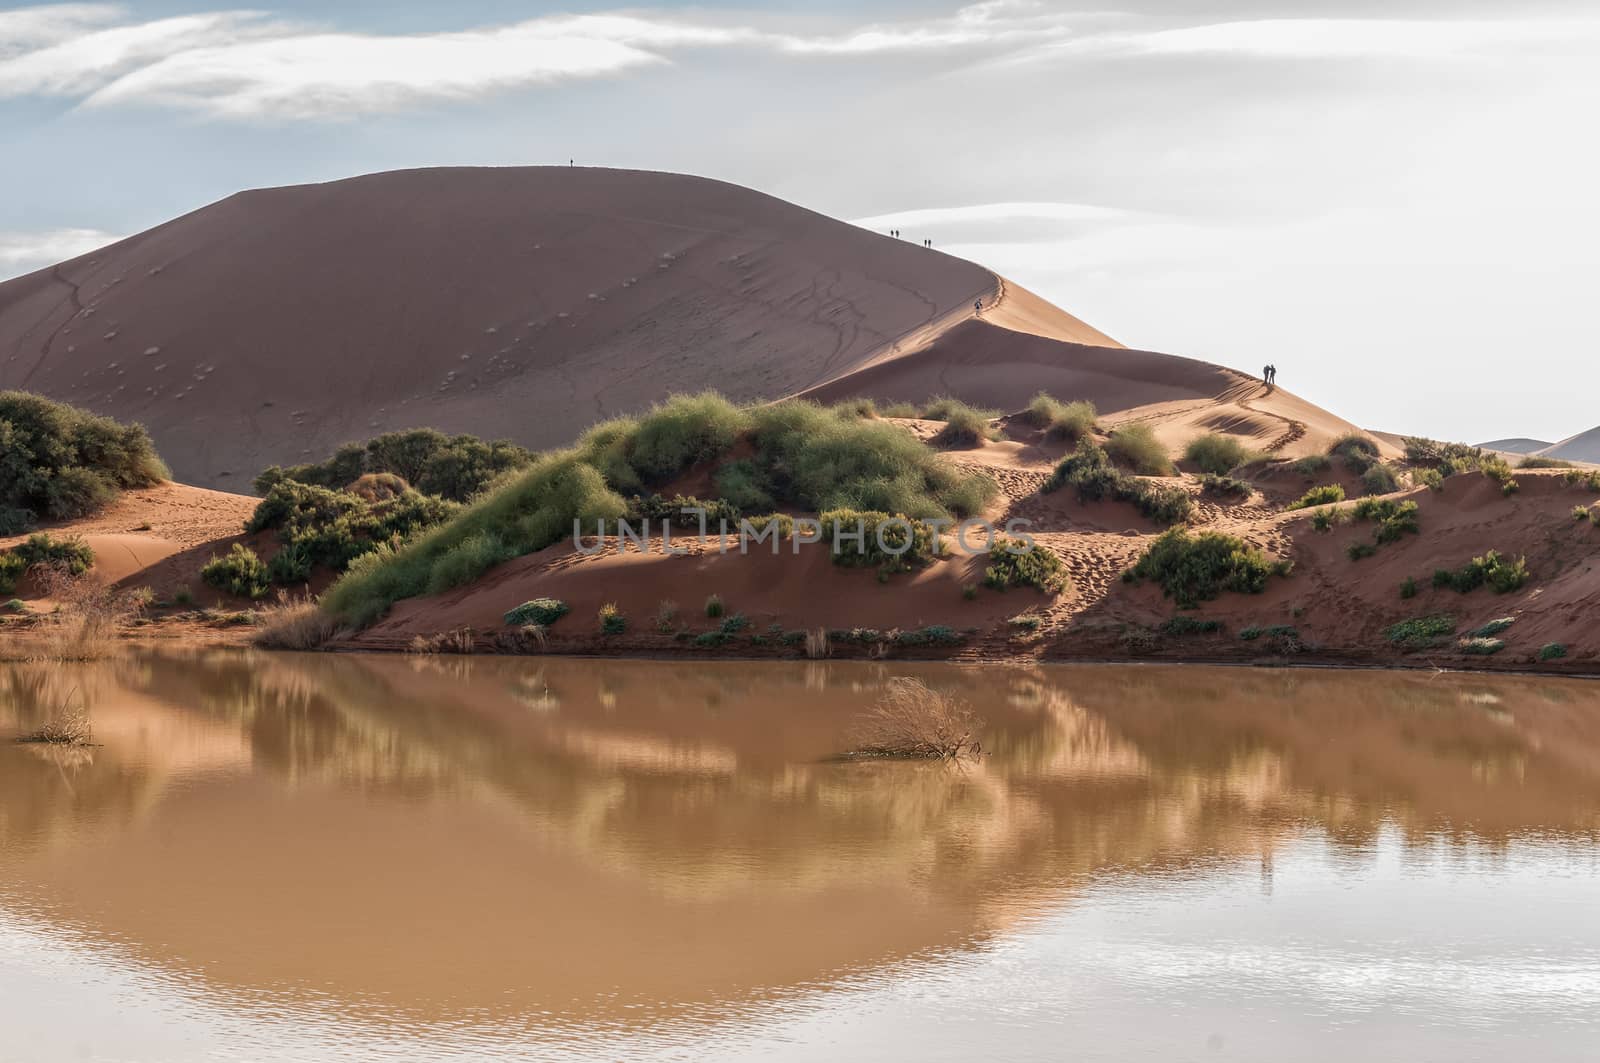 A view accross Sossusvlei, filled with water, and a sand dune with people on it